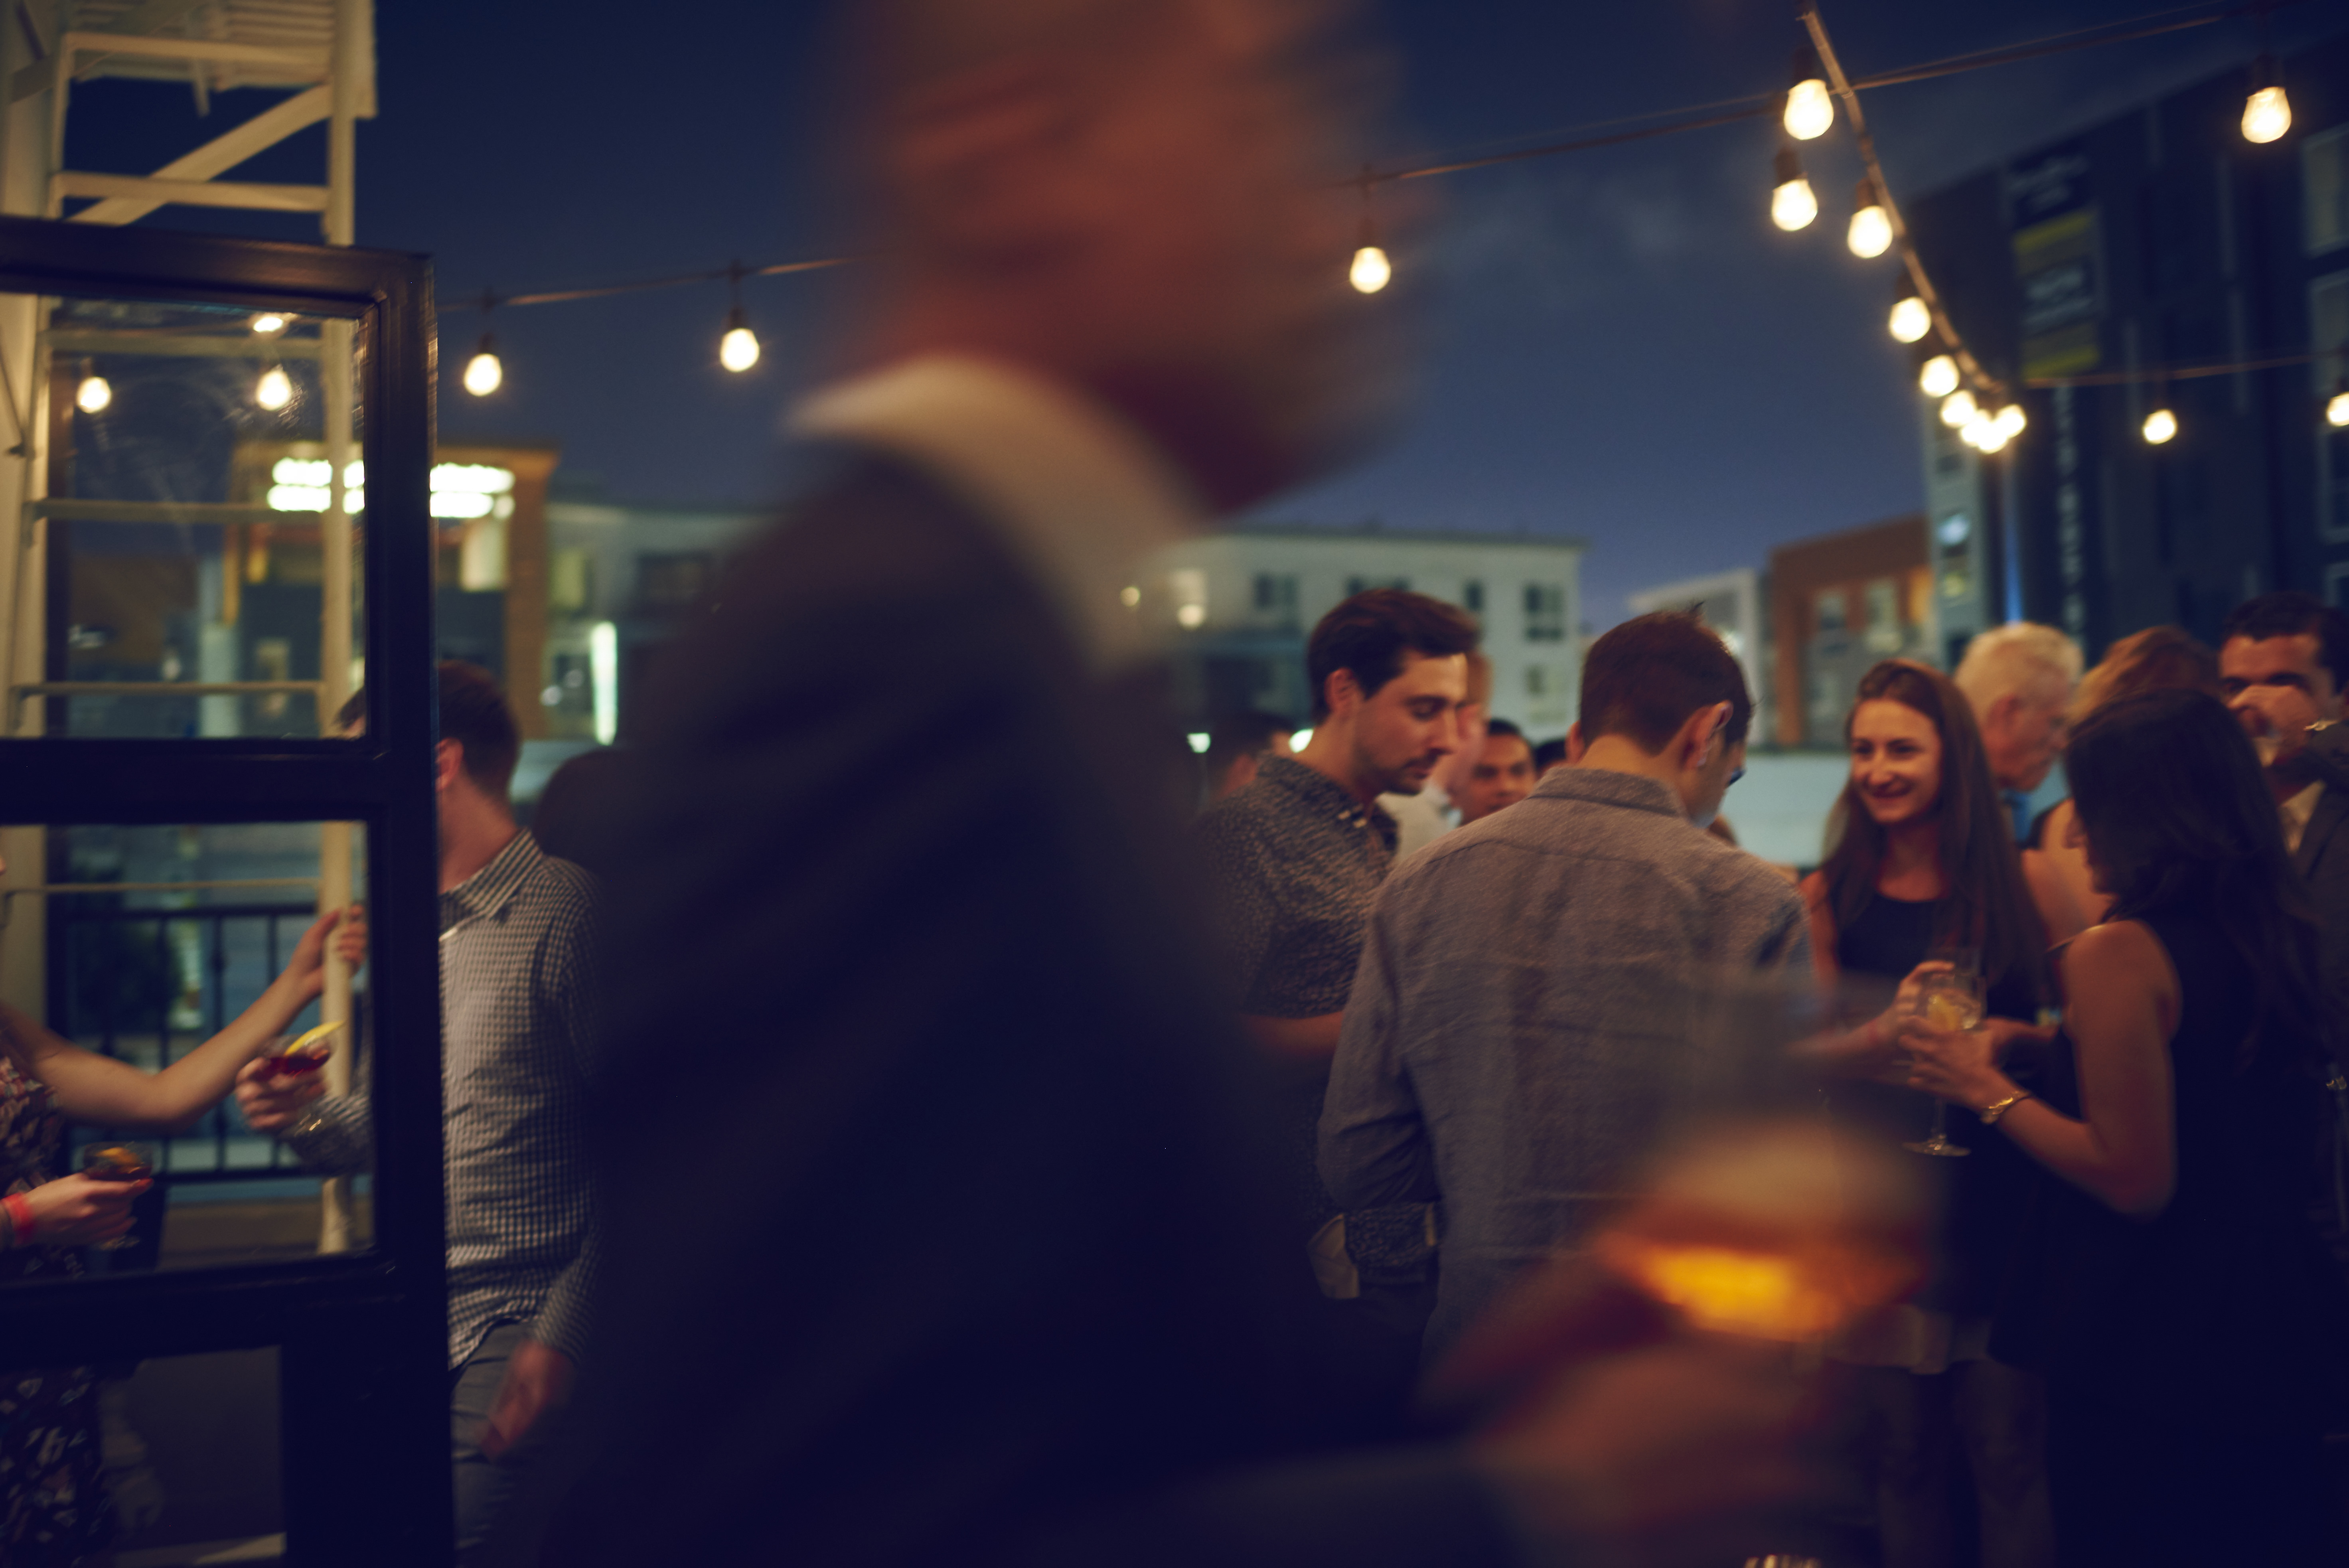 Crowd of people mingling at outdoor bar at night